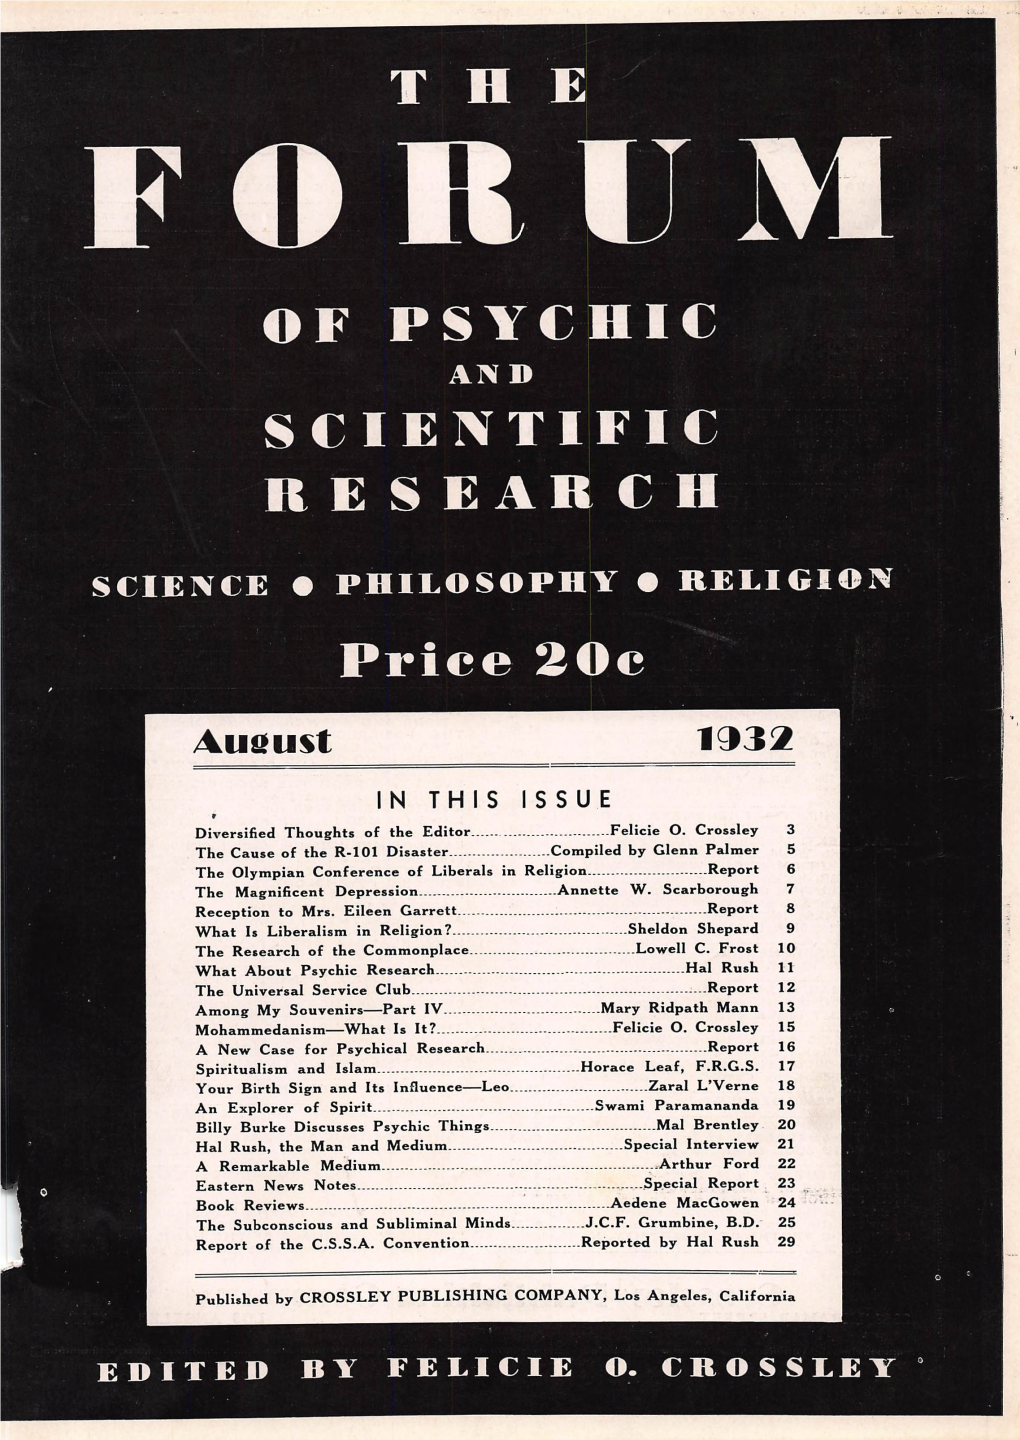 OF PSYCHIC SCIENTIFIC RESEARCH Price